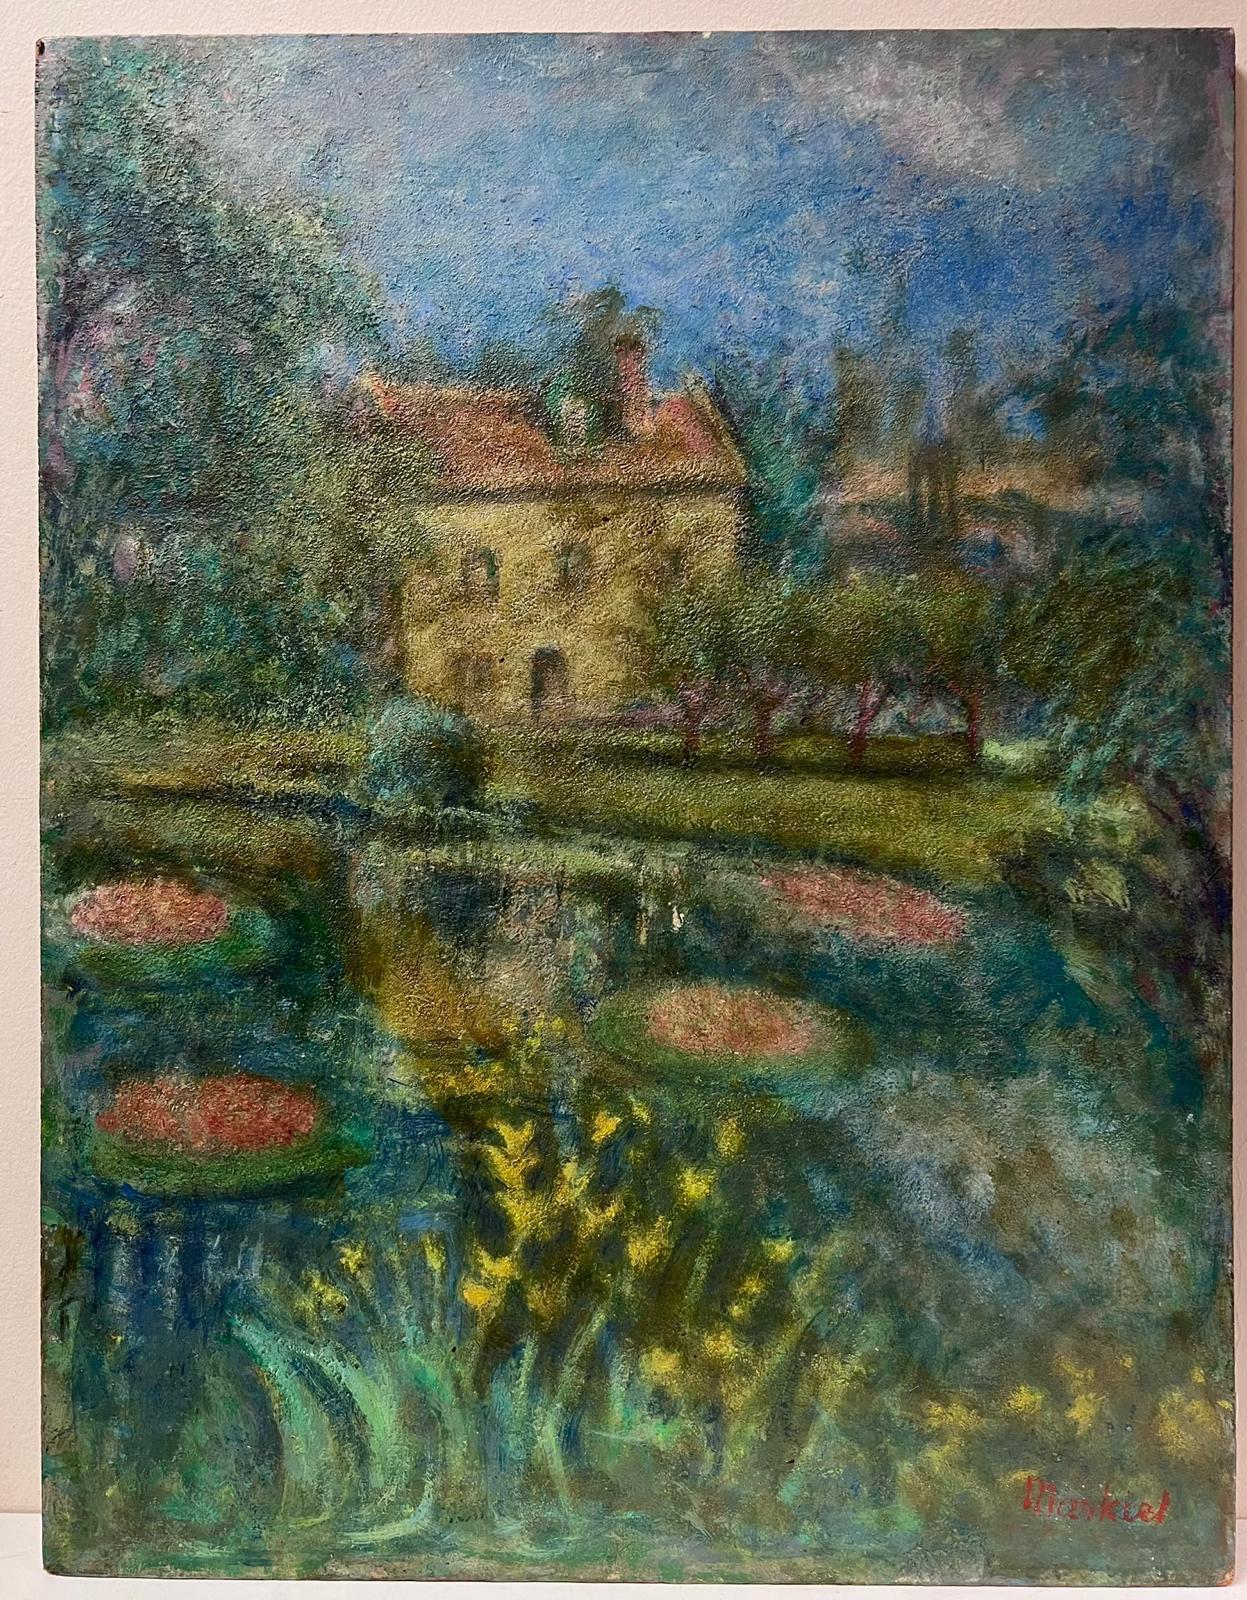 The Lily Pond 20th Century Modernist Oil Painting by Listed Polish artist - Gray Landscape Painting by Jacob Markiel